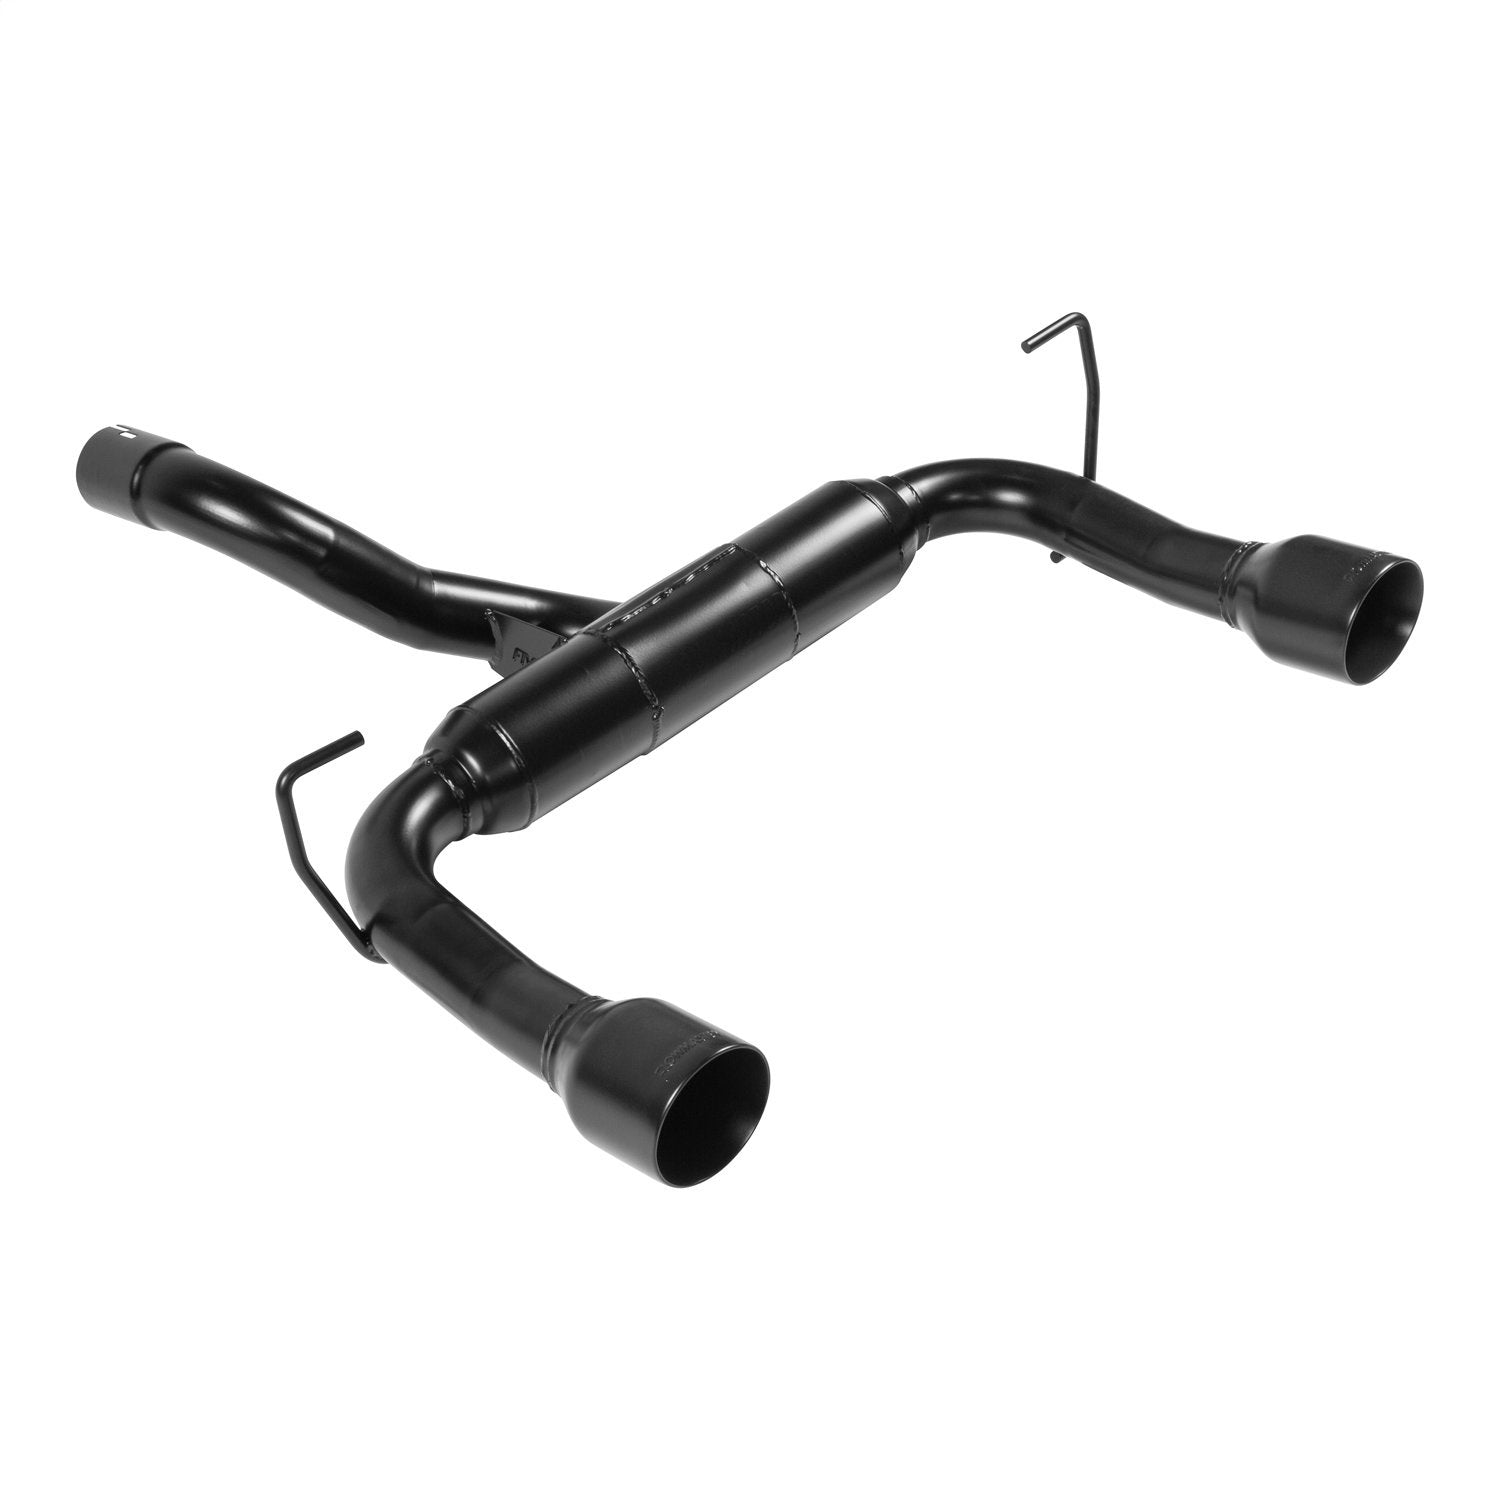 Flowmaster 817803 Outlaw Series Axle Back Exhaust System Fits Wrangler (JL)